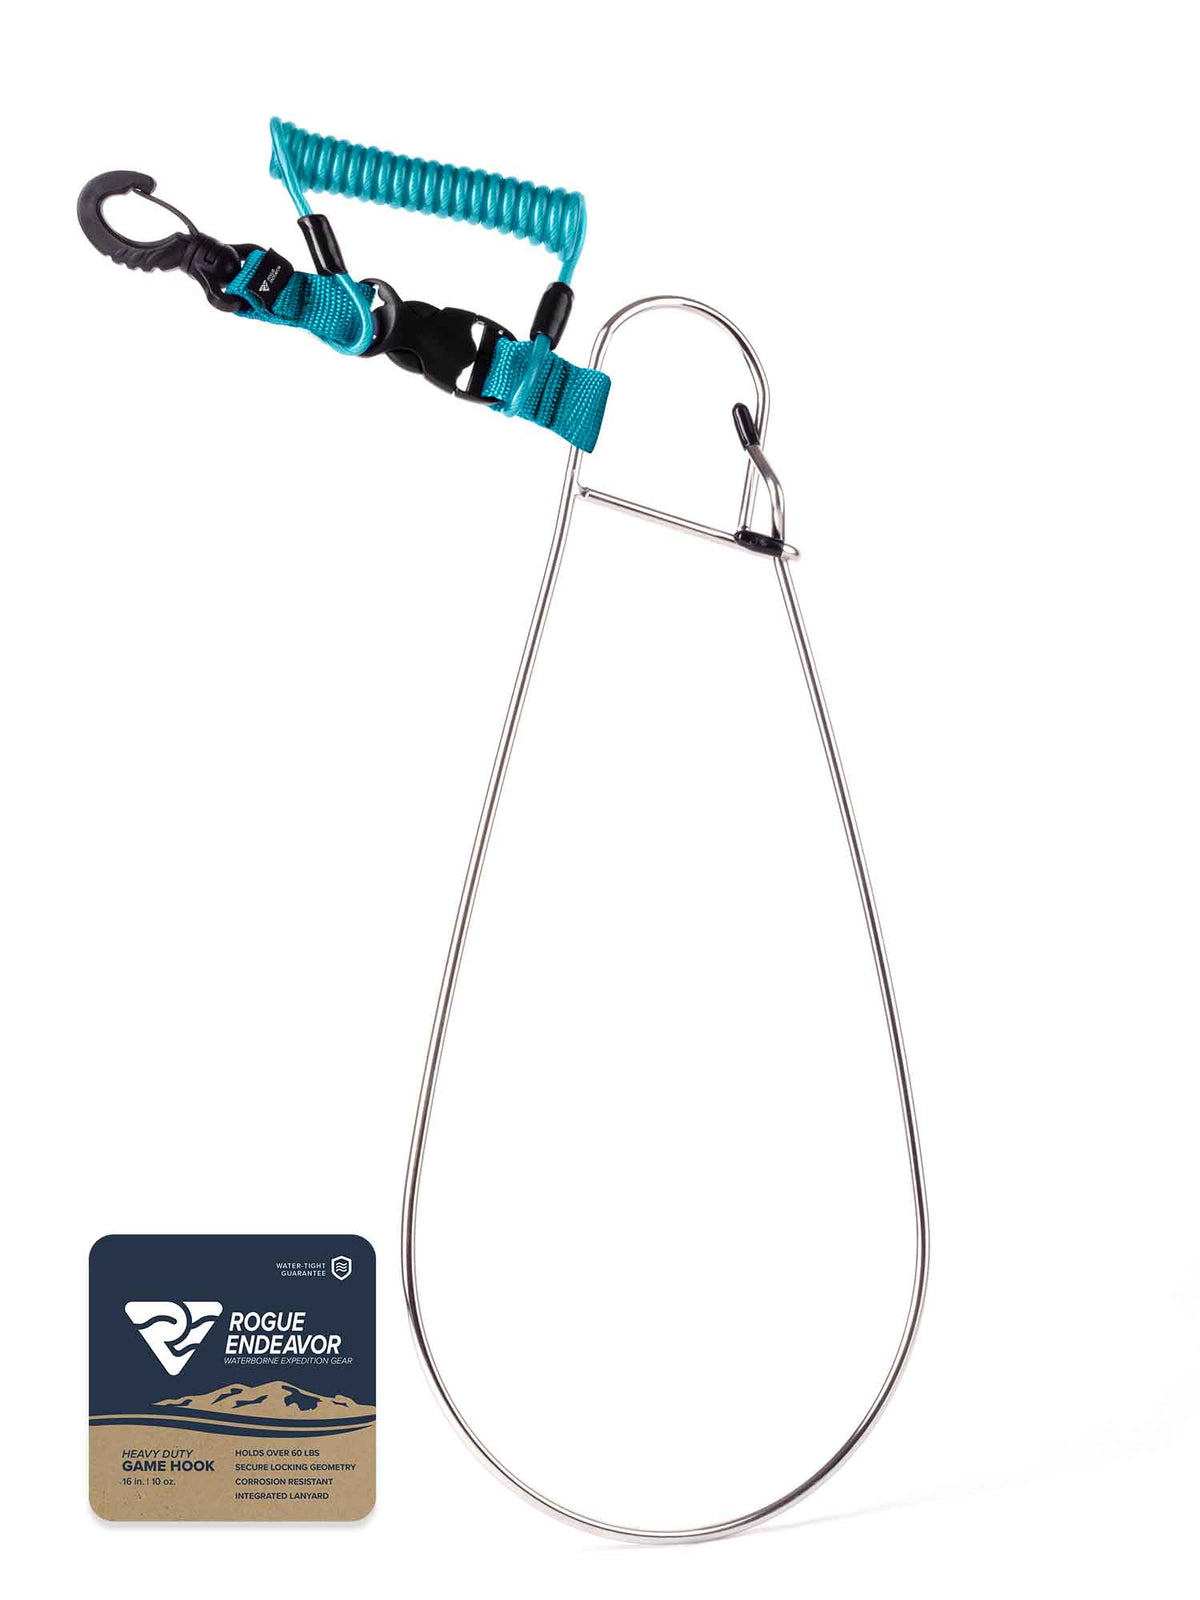 Rogue Endeavor Fish Stringer Clip, Large, Stainless Construction, Quick Release 36 Steel Core Lanyard, Designed For Spearfishing, Kayak Fishing 